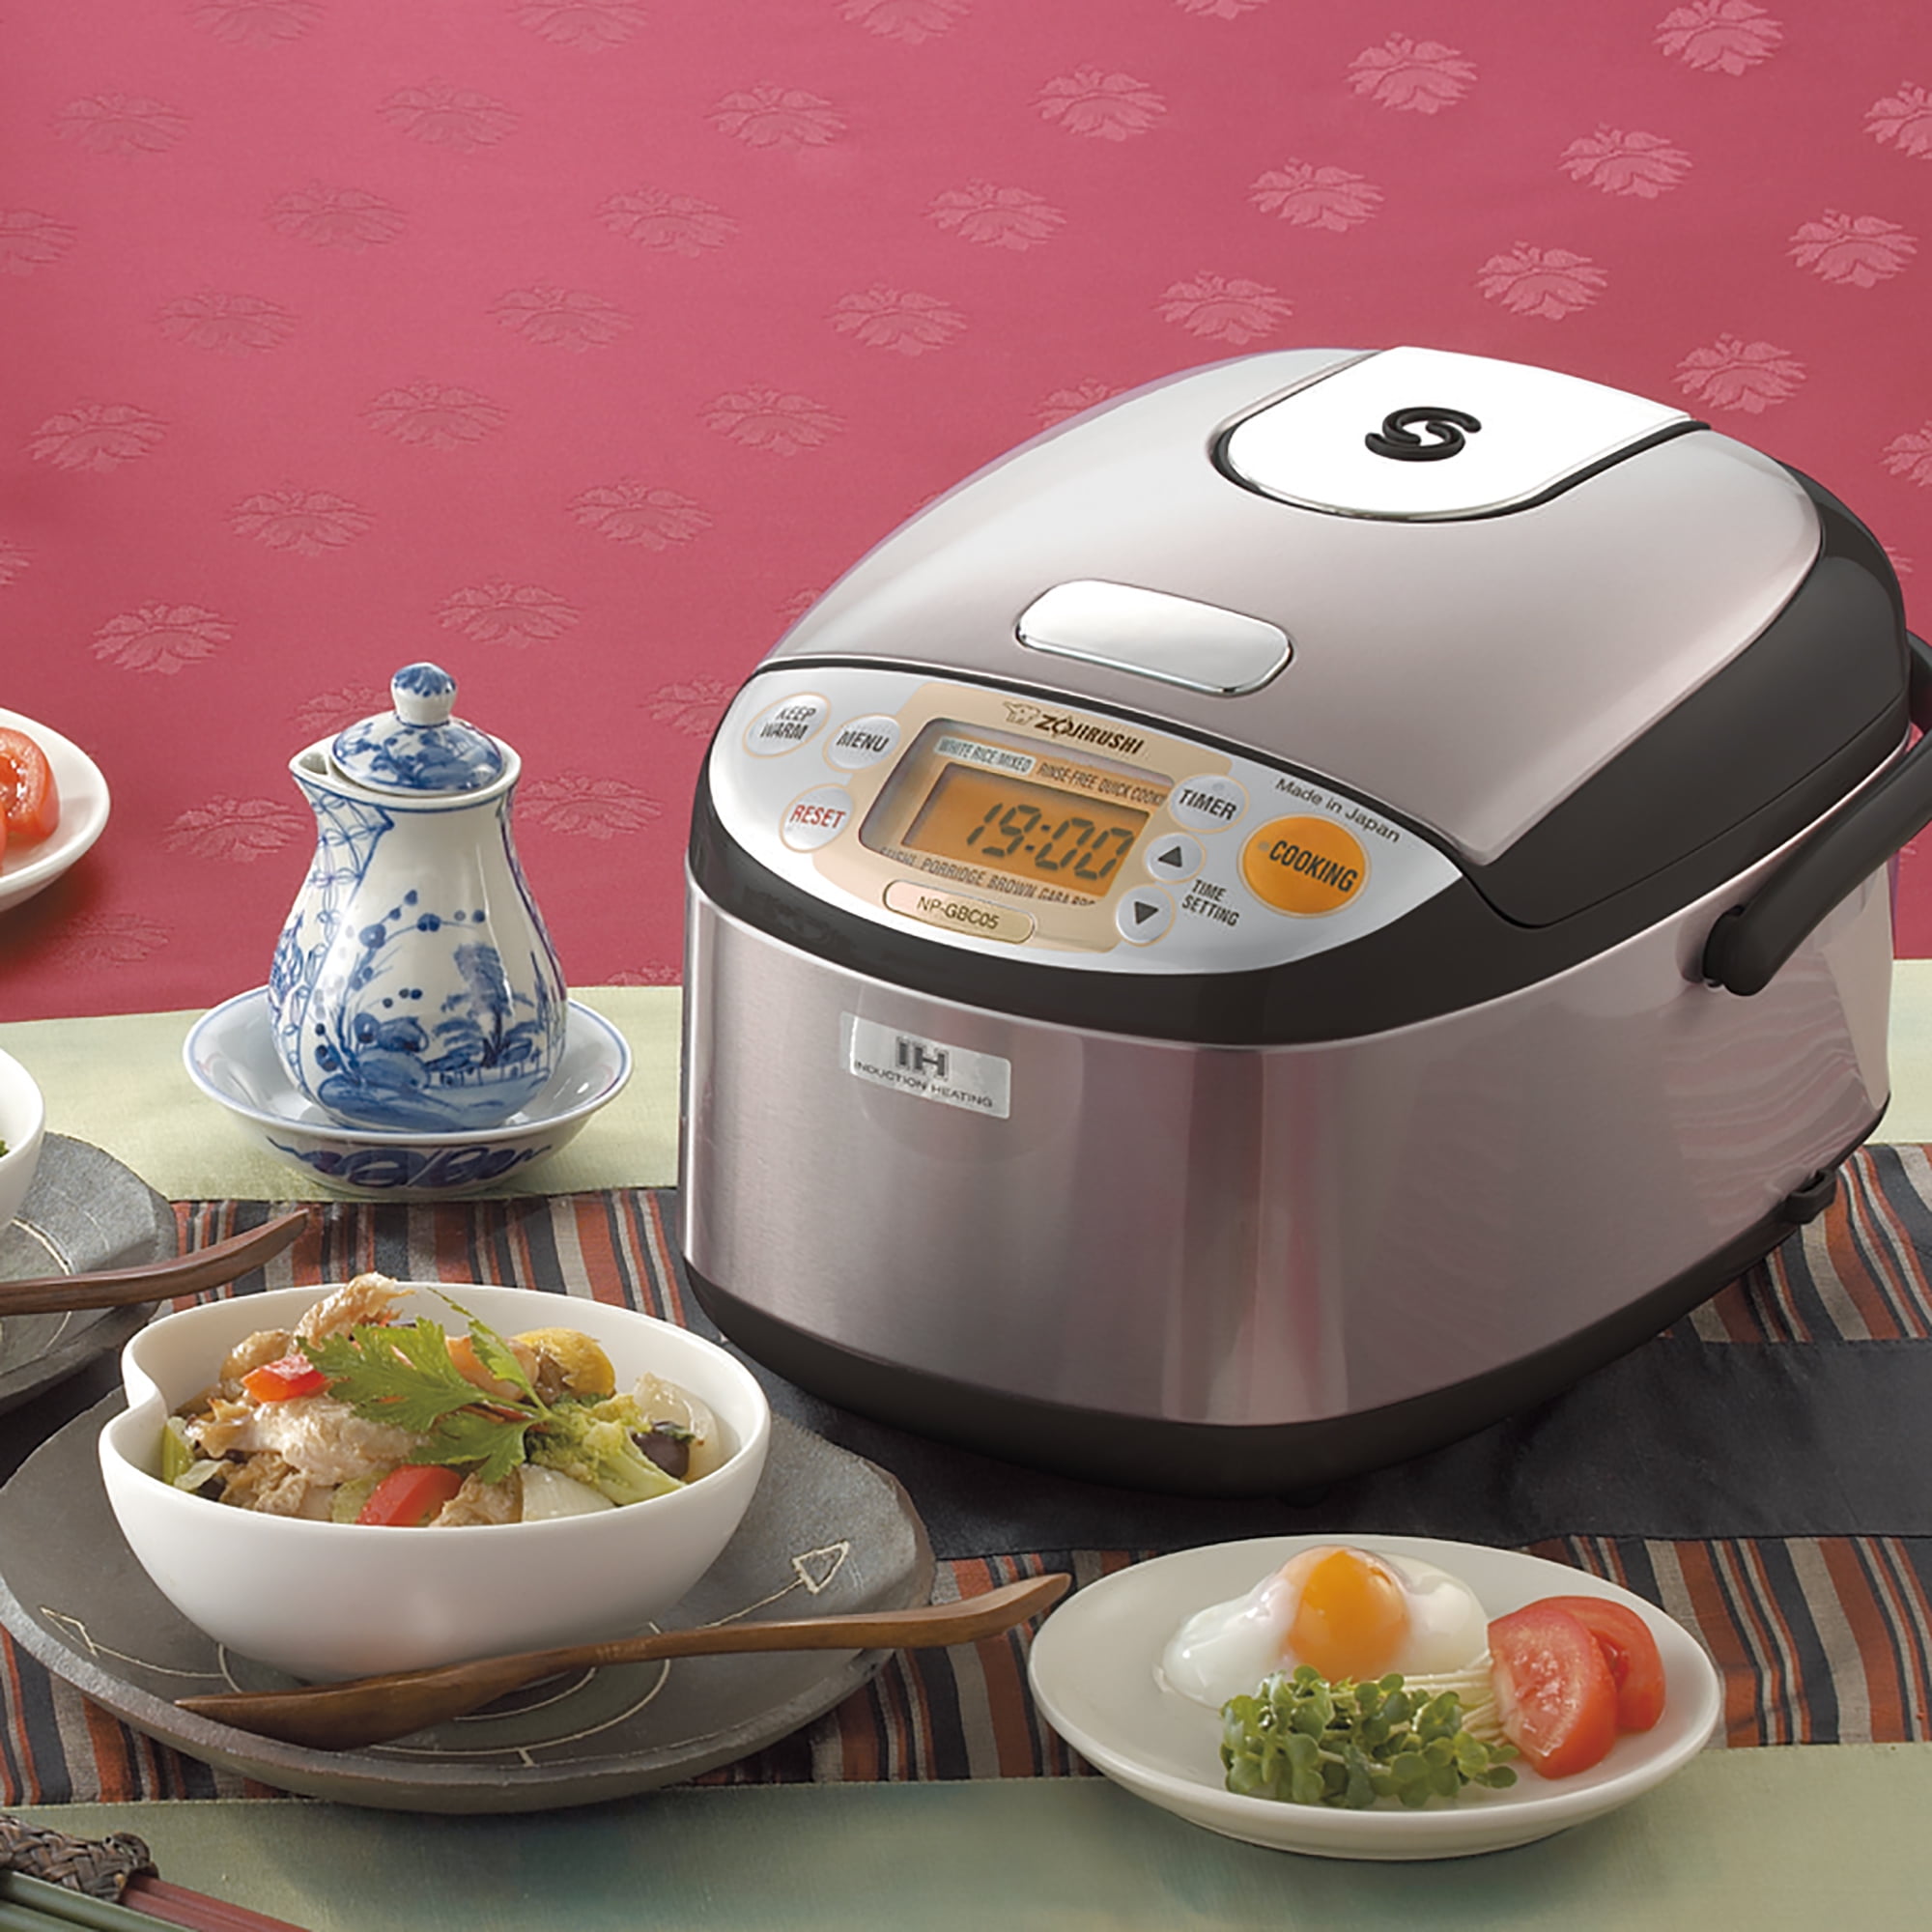 Zojirushi Rice Cooker and Pressure Cooker — Review 2017